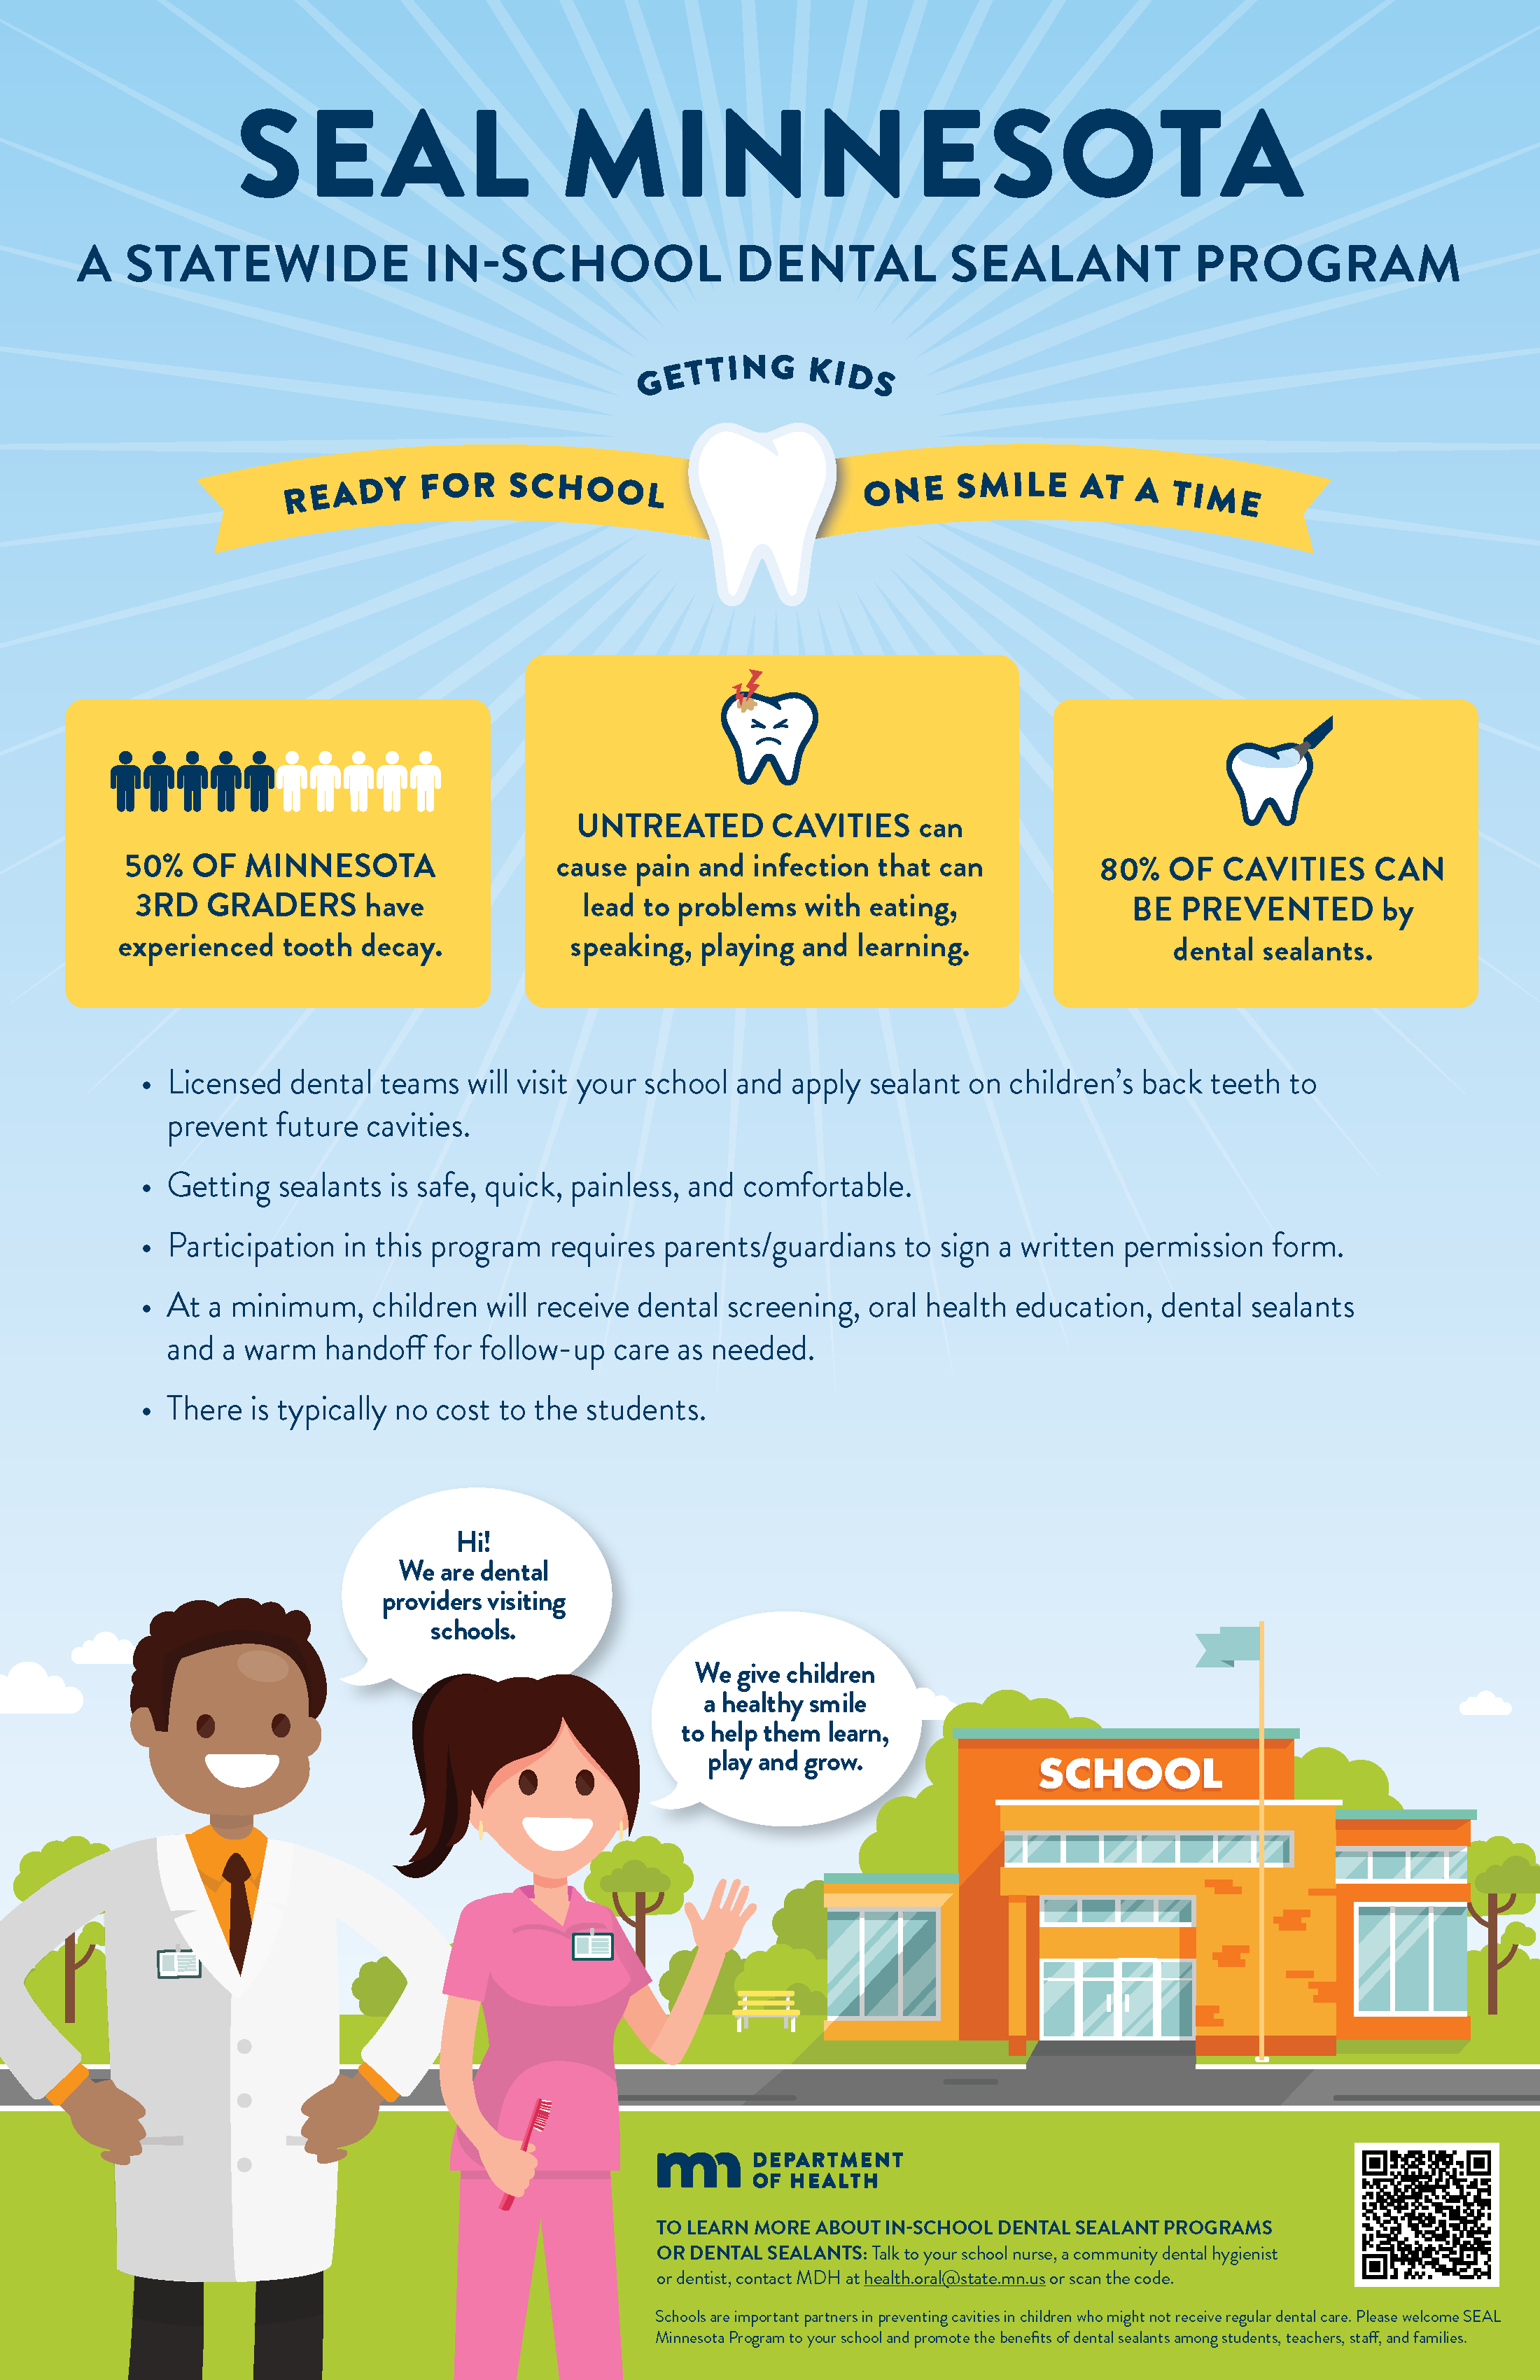 Poster for schools and parents about SEAL Minnesota Program and information on dental sealants and ways to prevent dental decay.